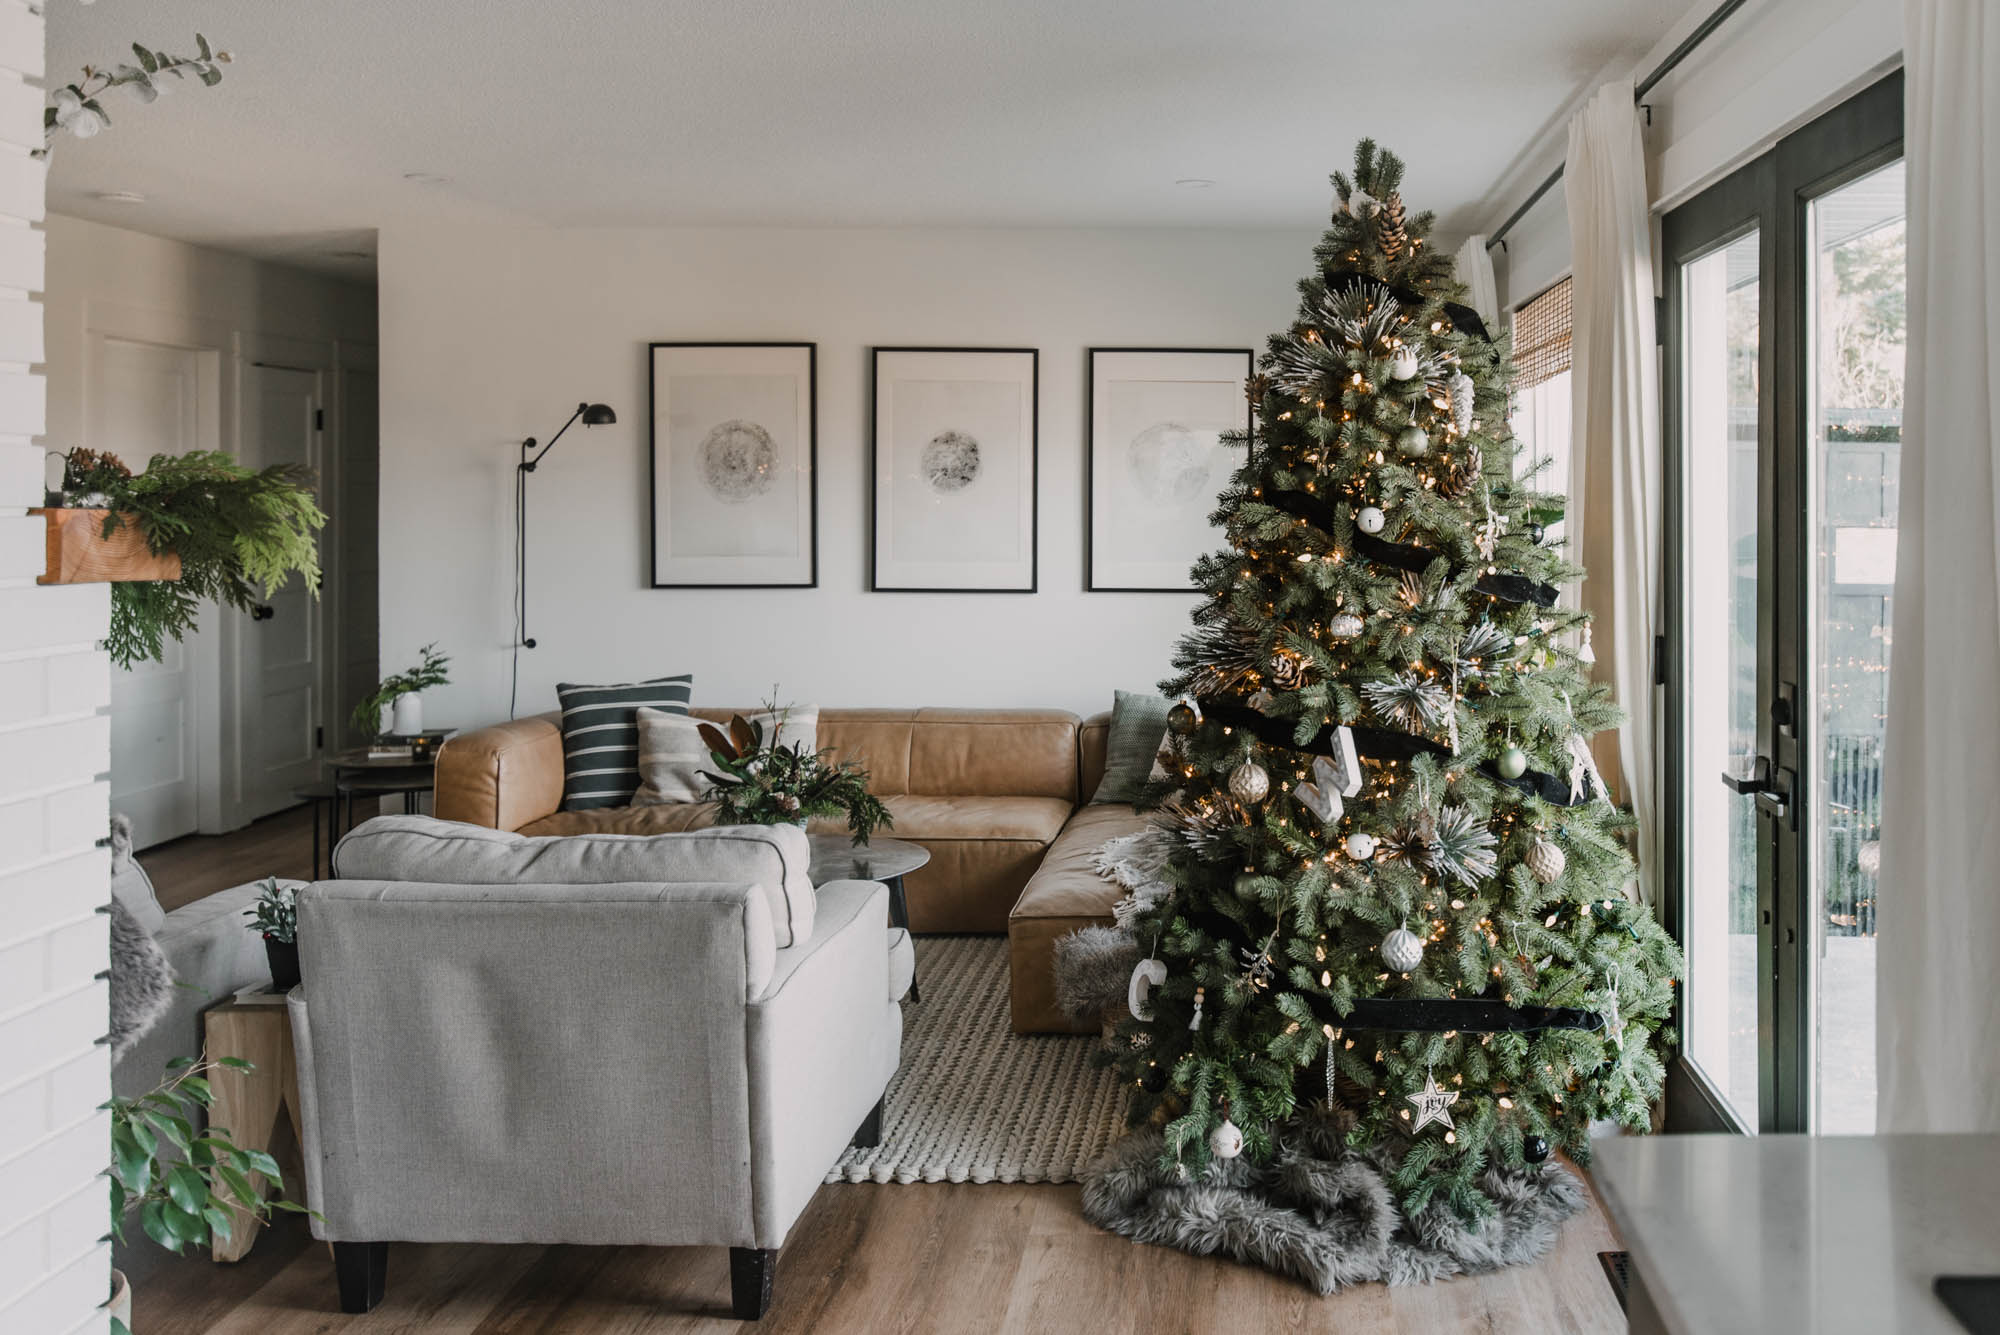 Cozy Modern Holiday Home Tour